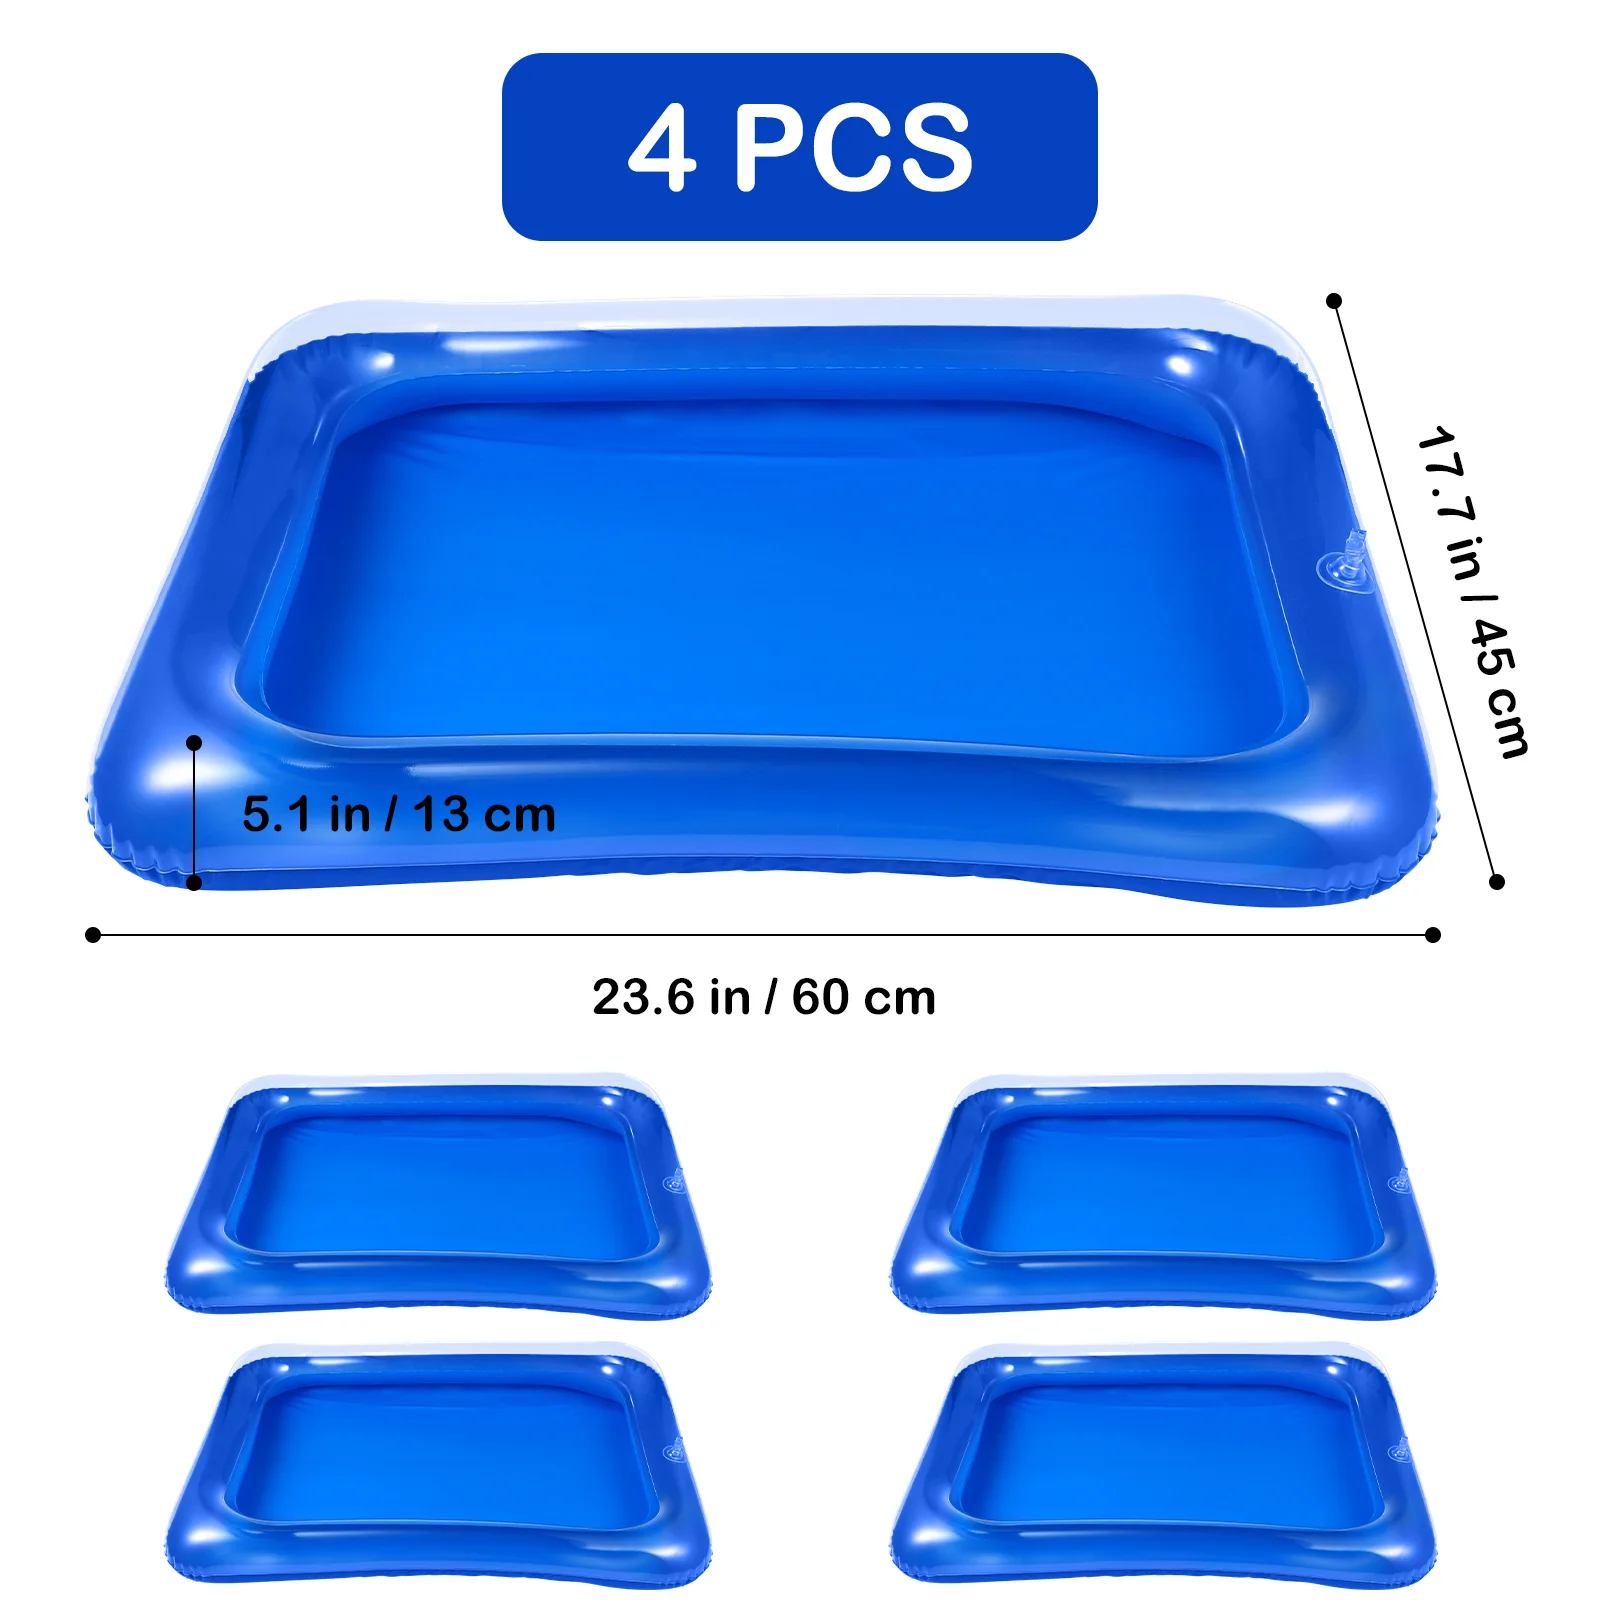 

Inflatable Ice Bar Coolers Server Trays Serving Reusable Drink Containers Drinks Pvc Bars Pool Party